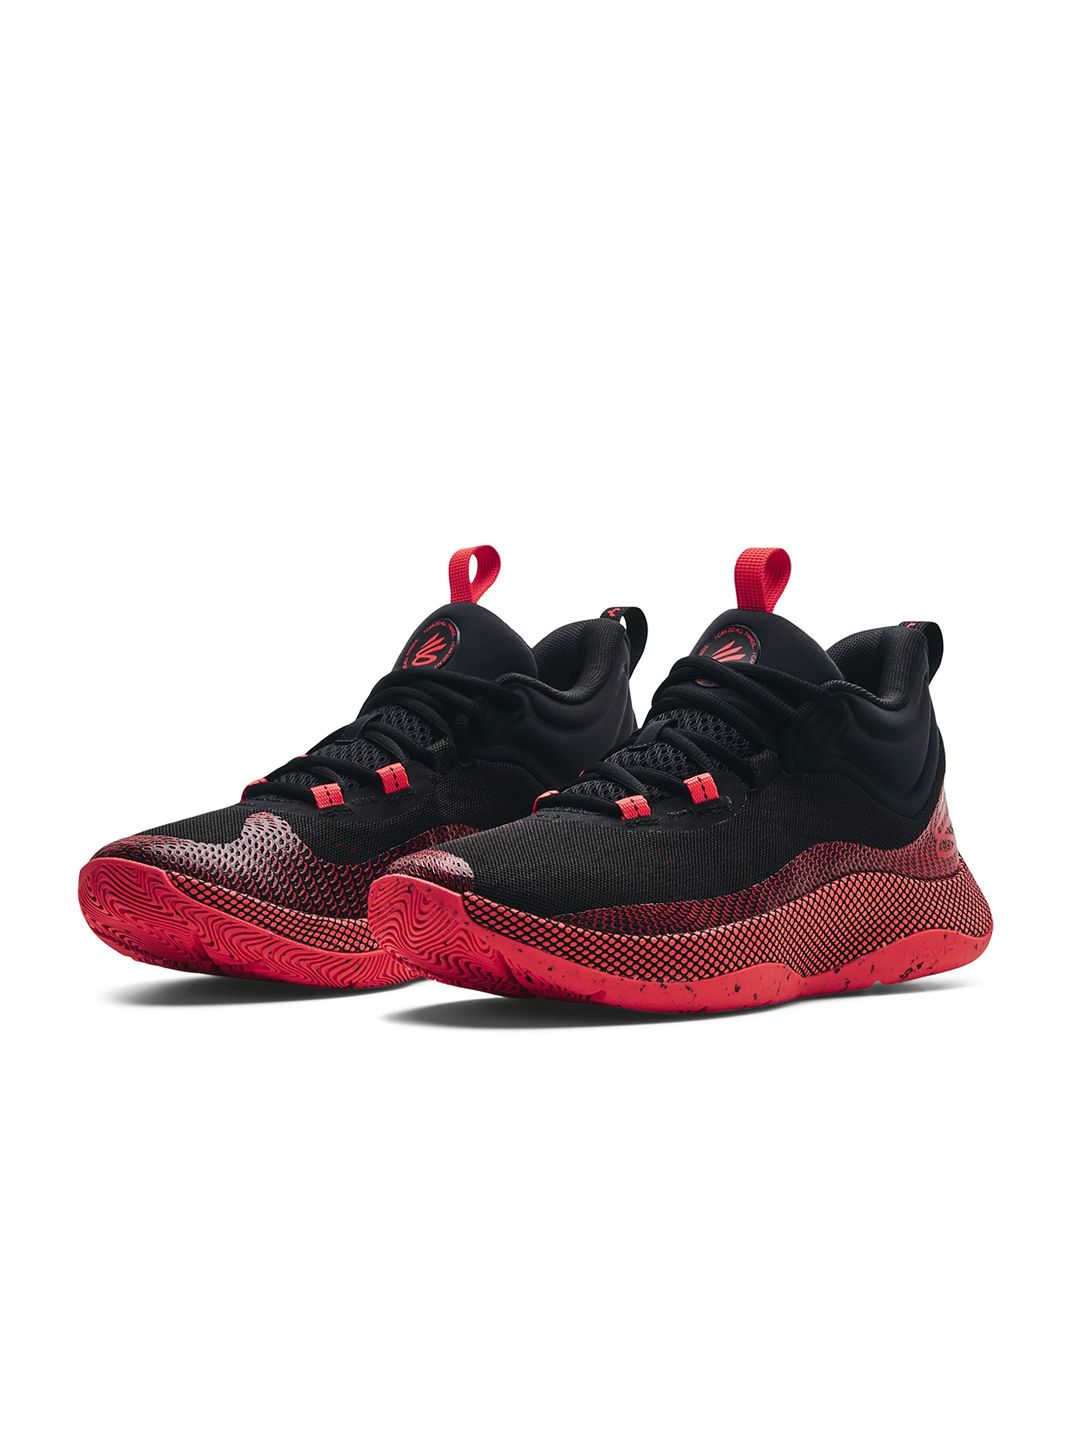 UNDER ARMOUR Unisex Black Solid Curry Hovr Splash Regular Basketball Shoes Price in India